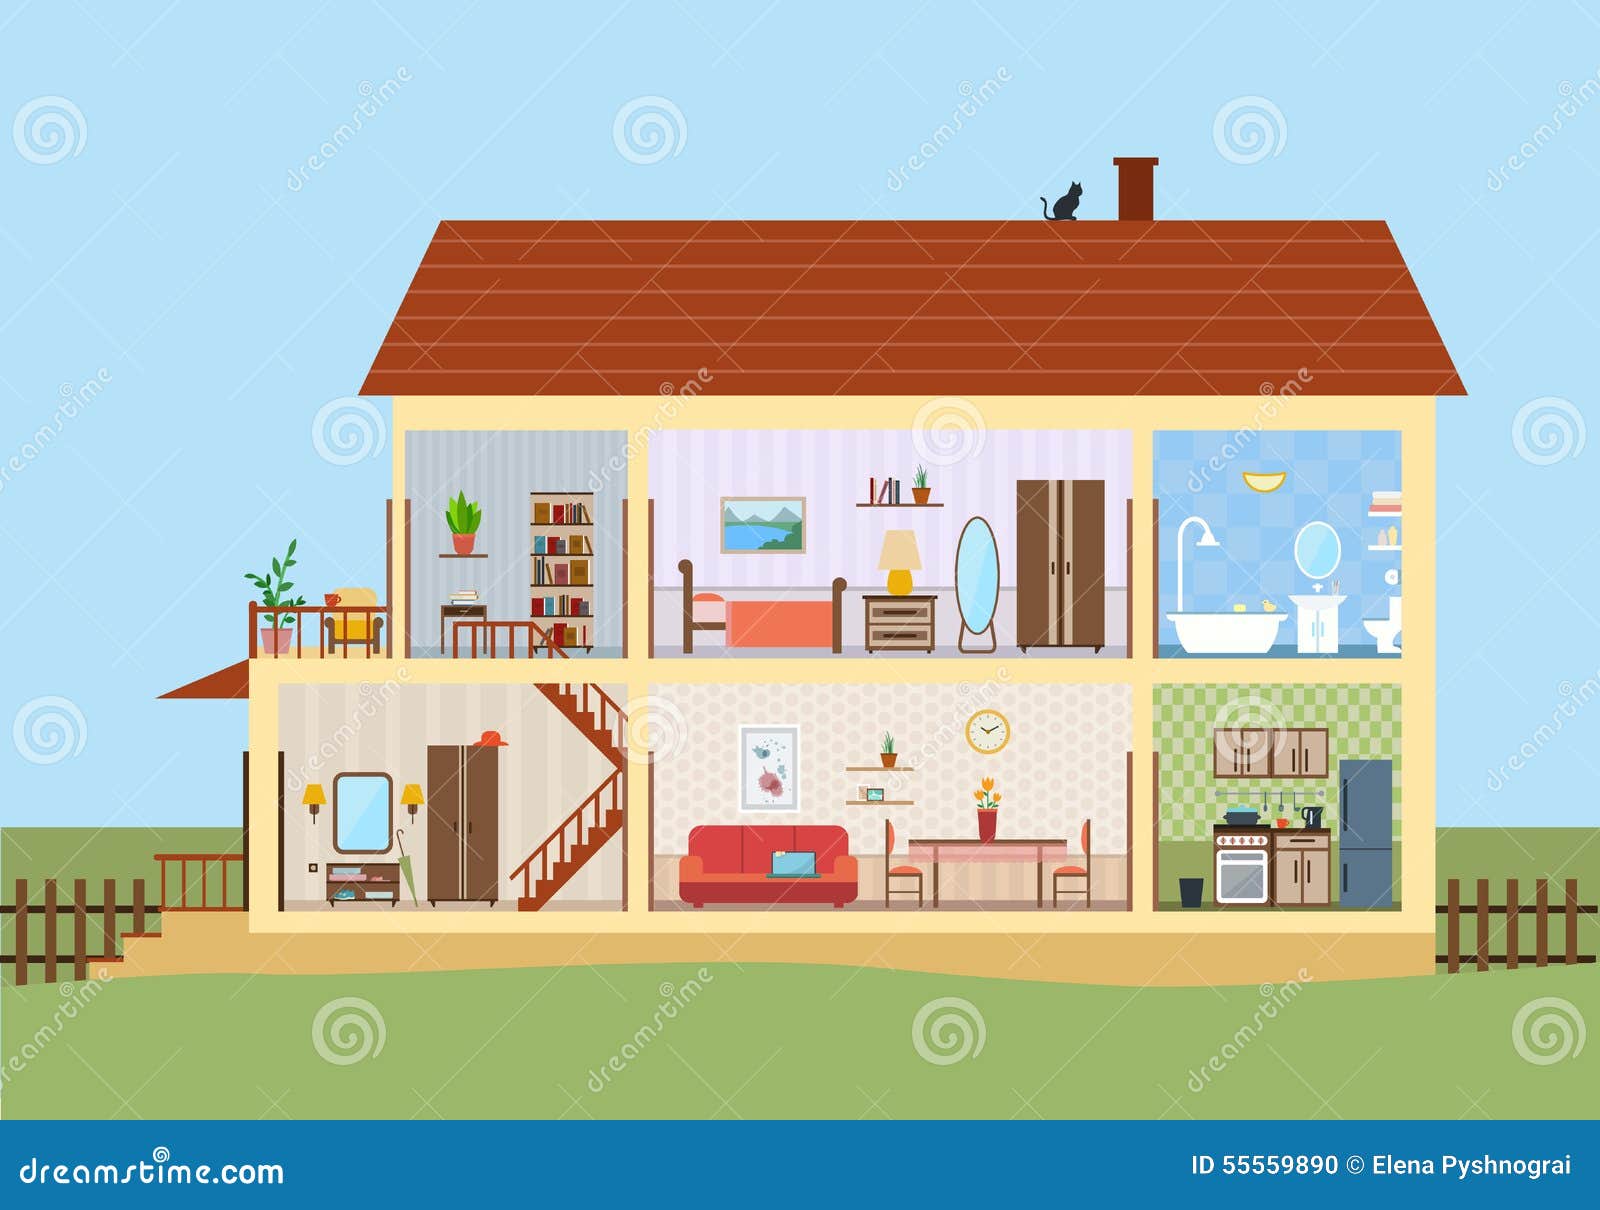 house cut detailed modern house interior rooms furniture flat style vector illustration 55559890